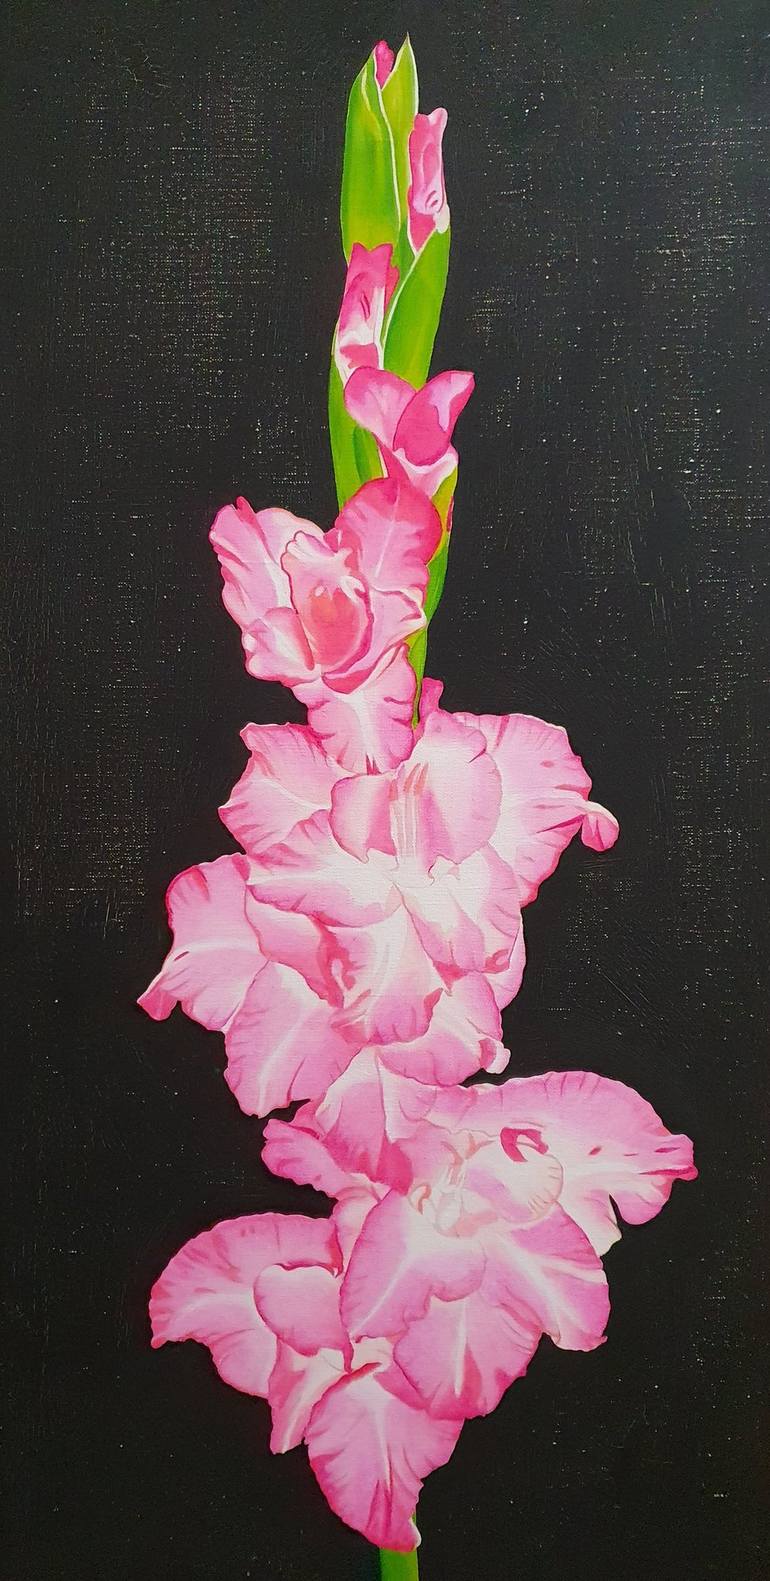 Original Floral Painting by Matteo Germano